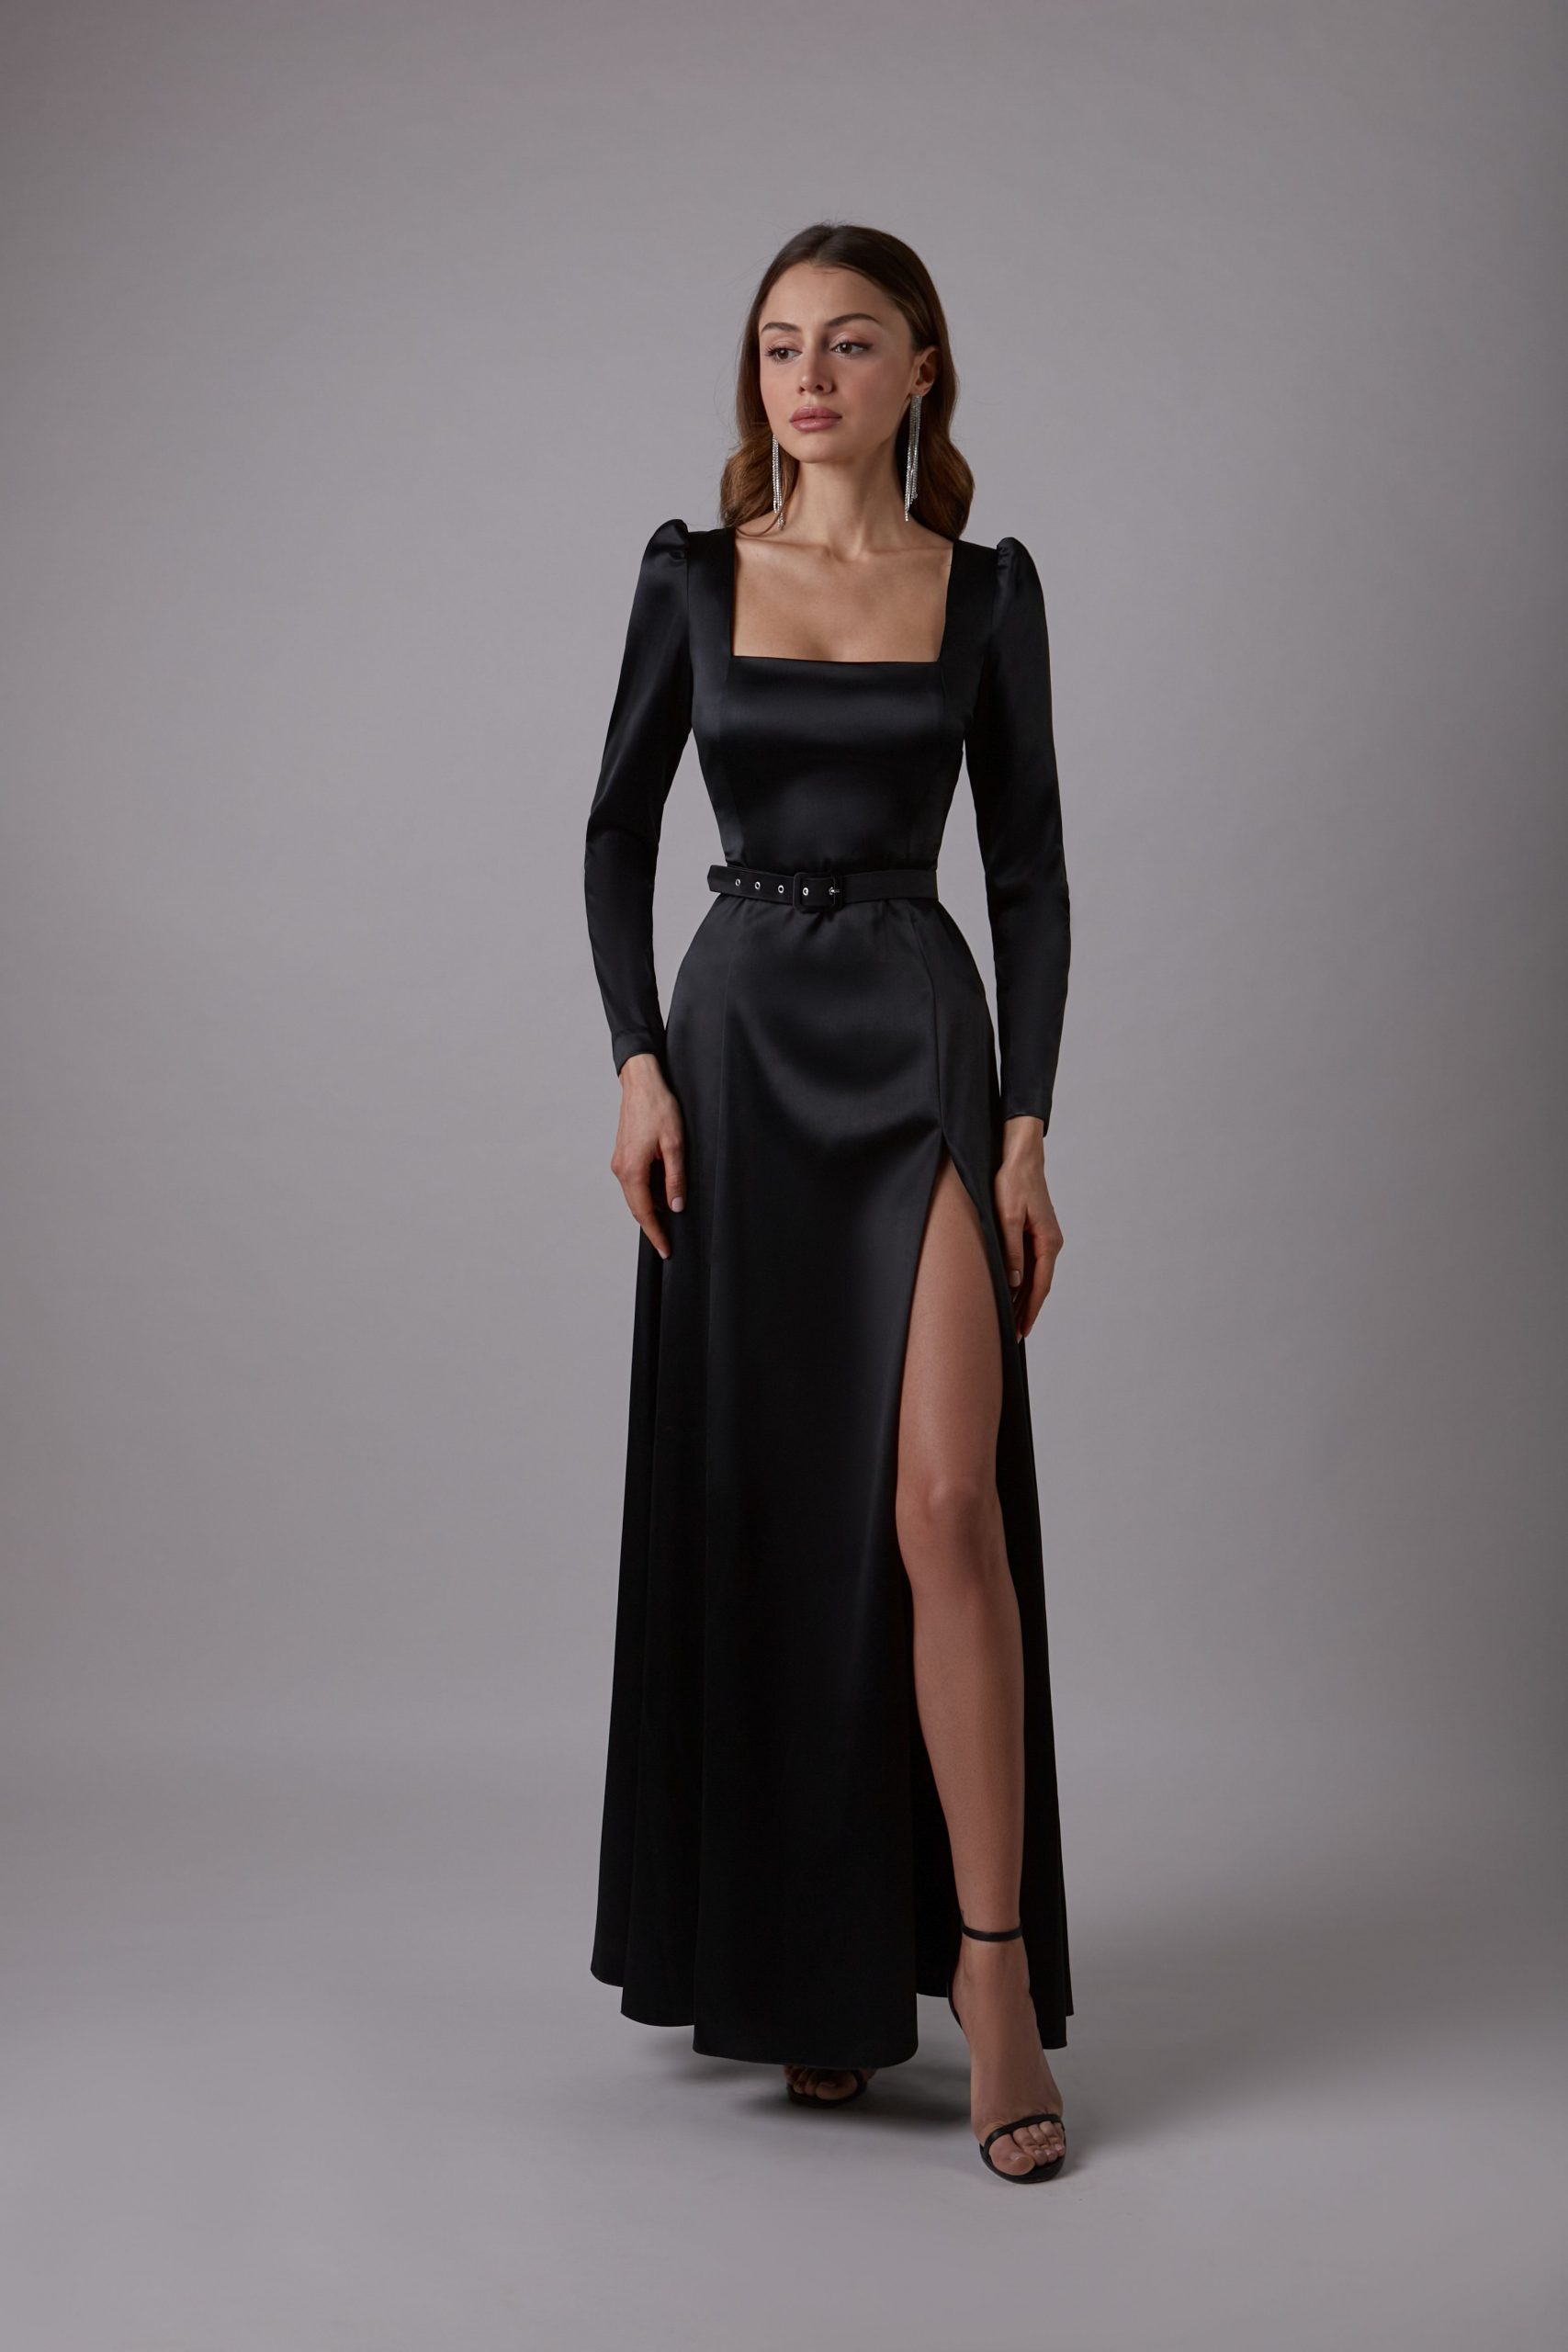 Fall Formal Dresses 19 Ideas: Embrace Elegance and Style